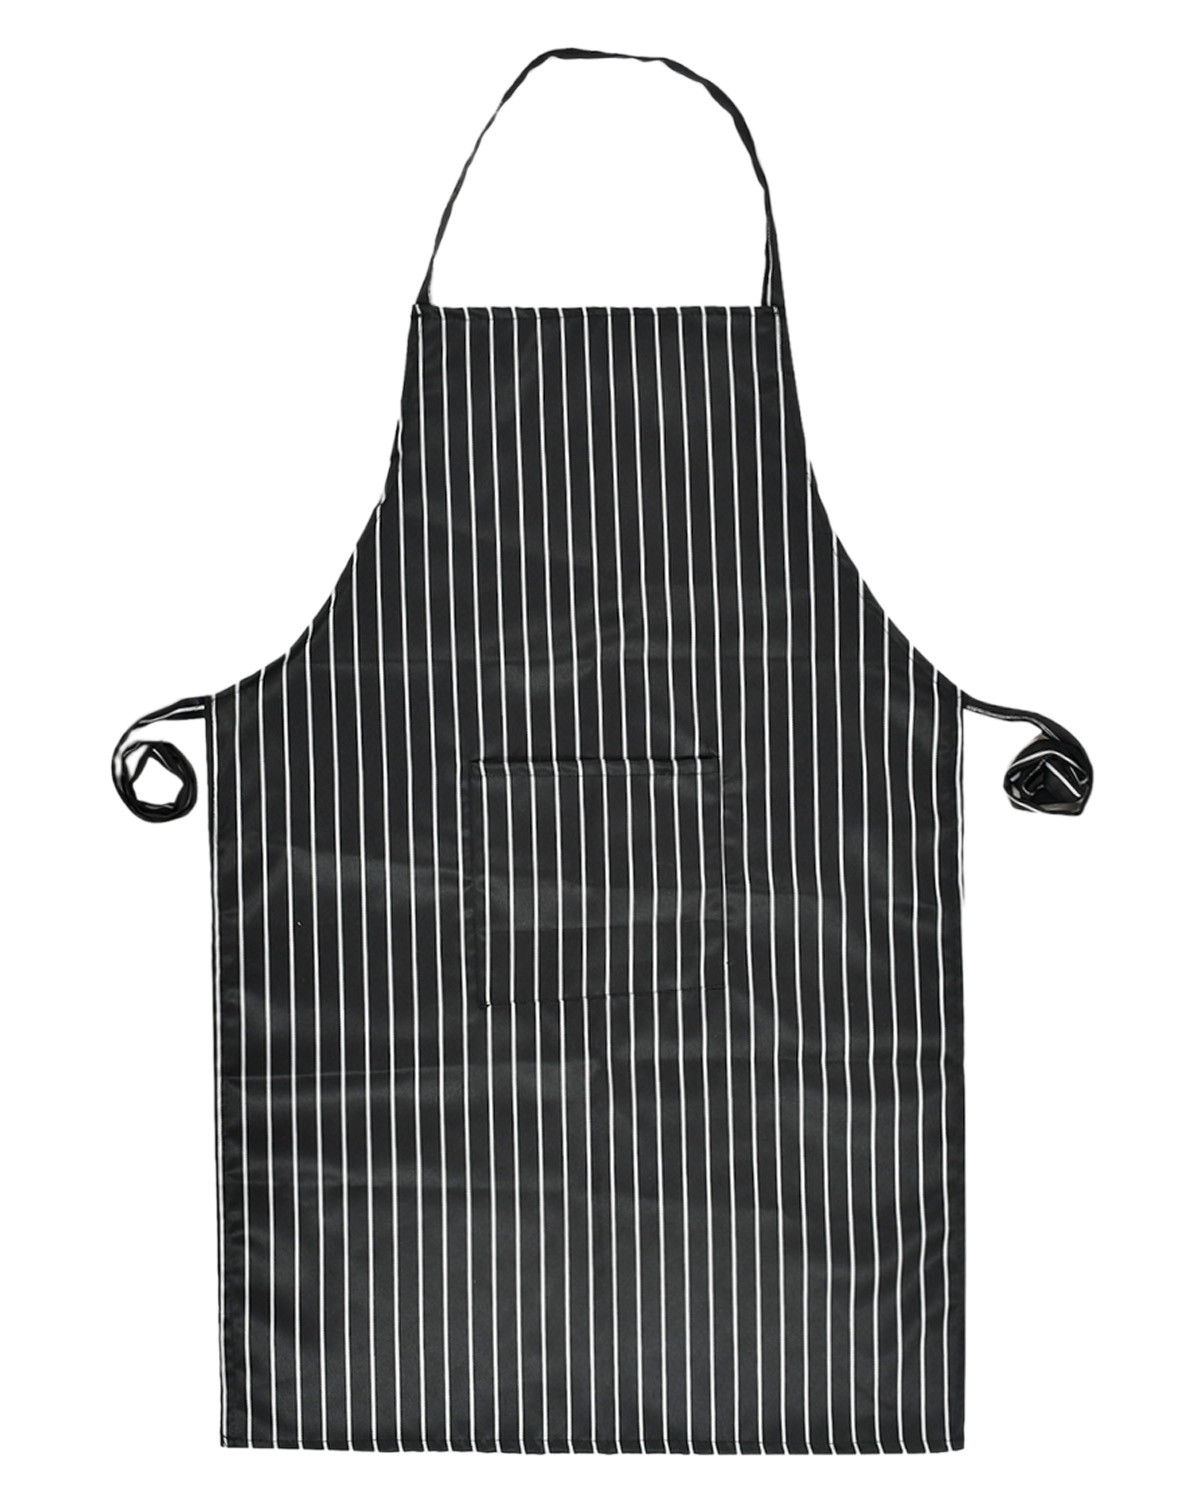 Kuber Industries Linning Printed Apron with 1 Front Pocket (Black)